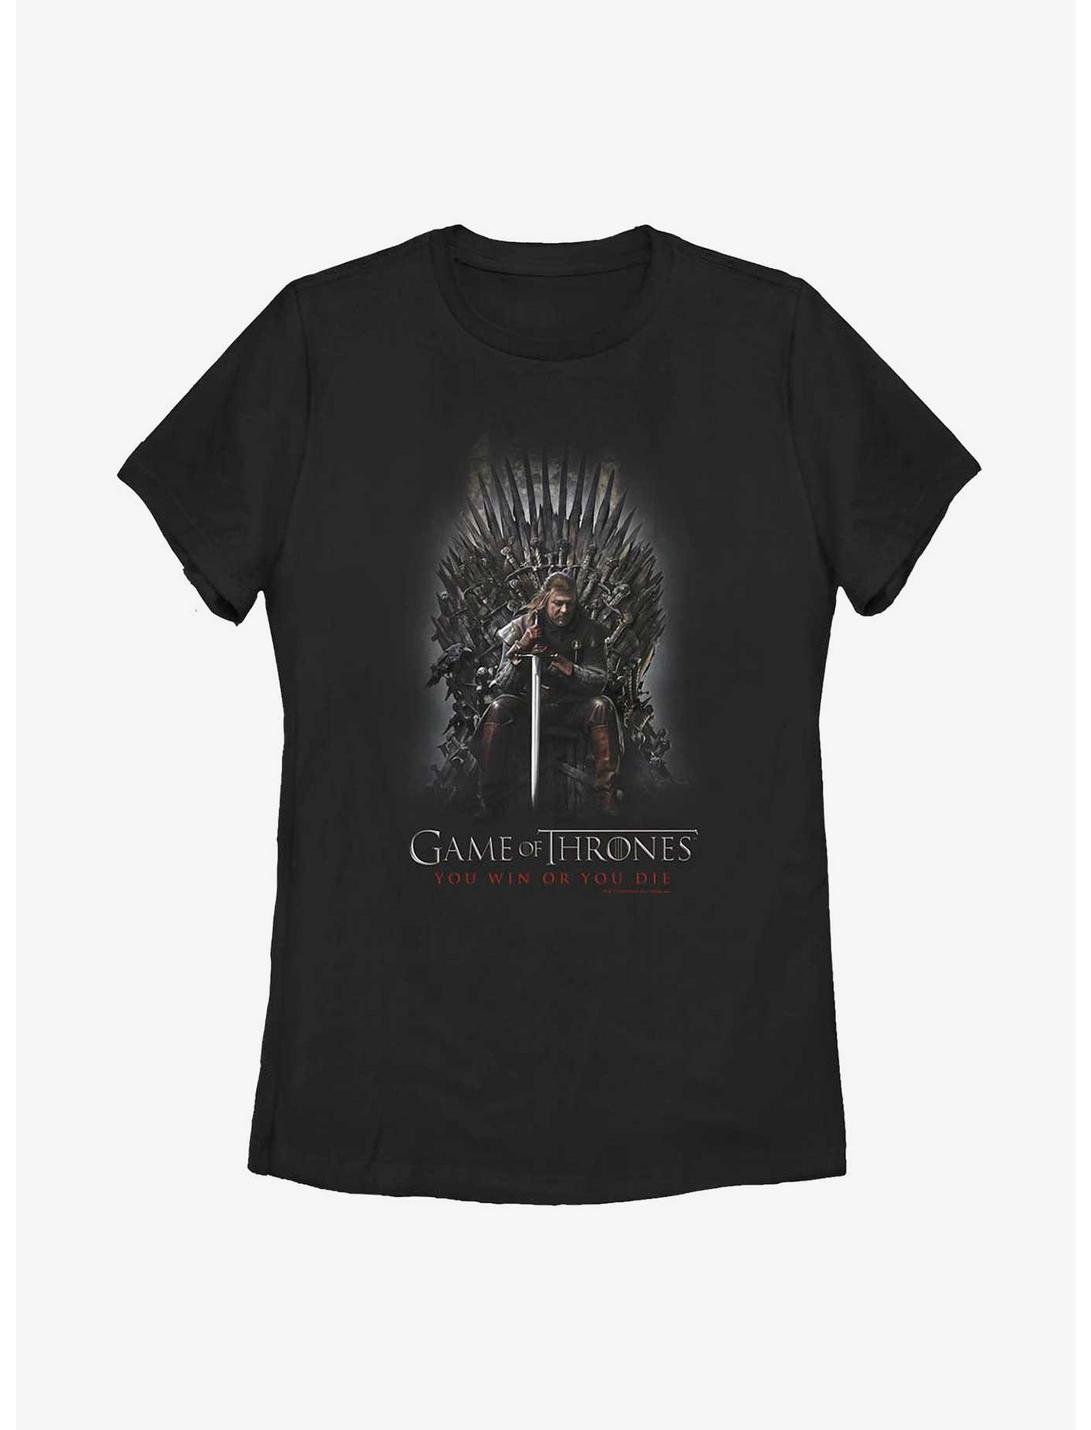 Plus Size Game Of Thrones Ned Stark Iron Throne Womens T-Shirt, BLACK, hi-res